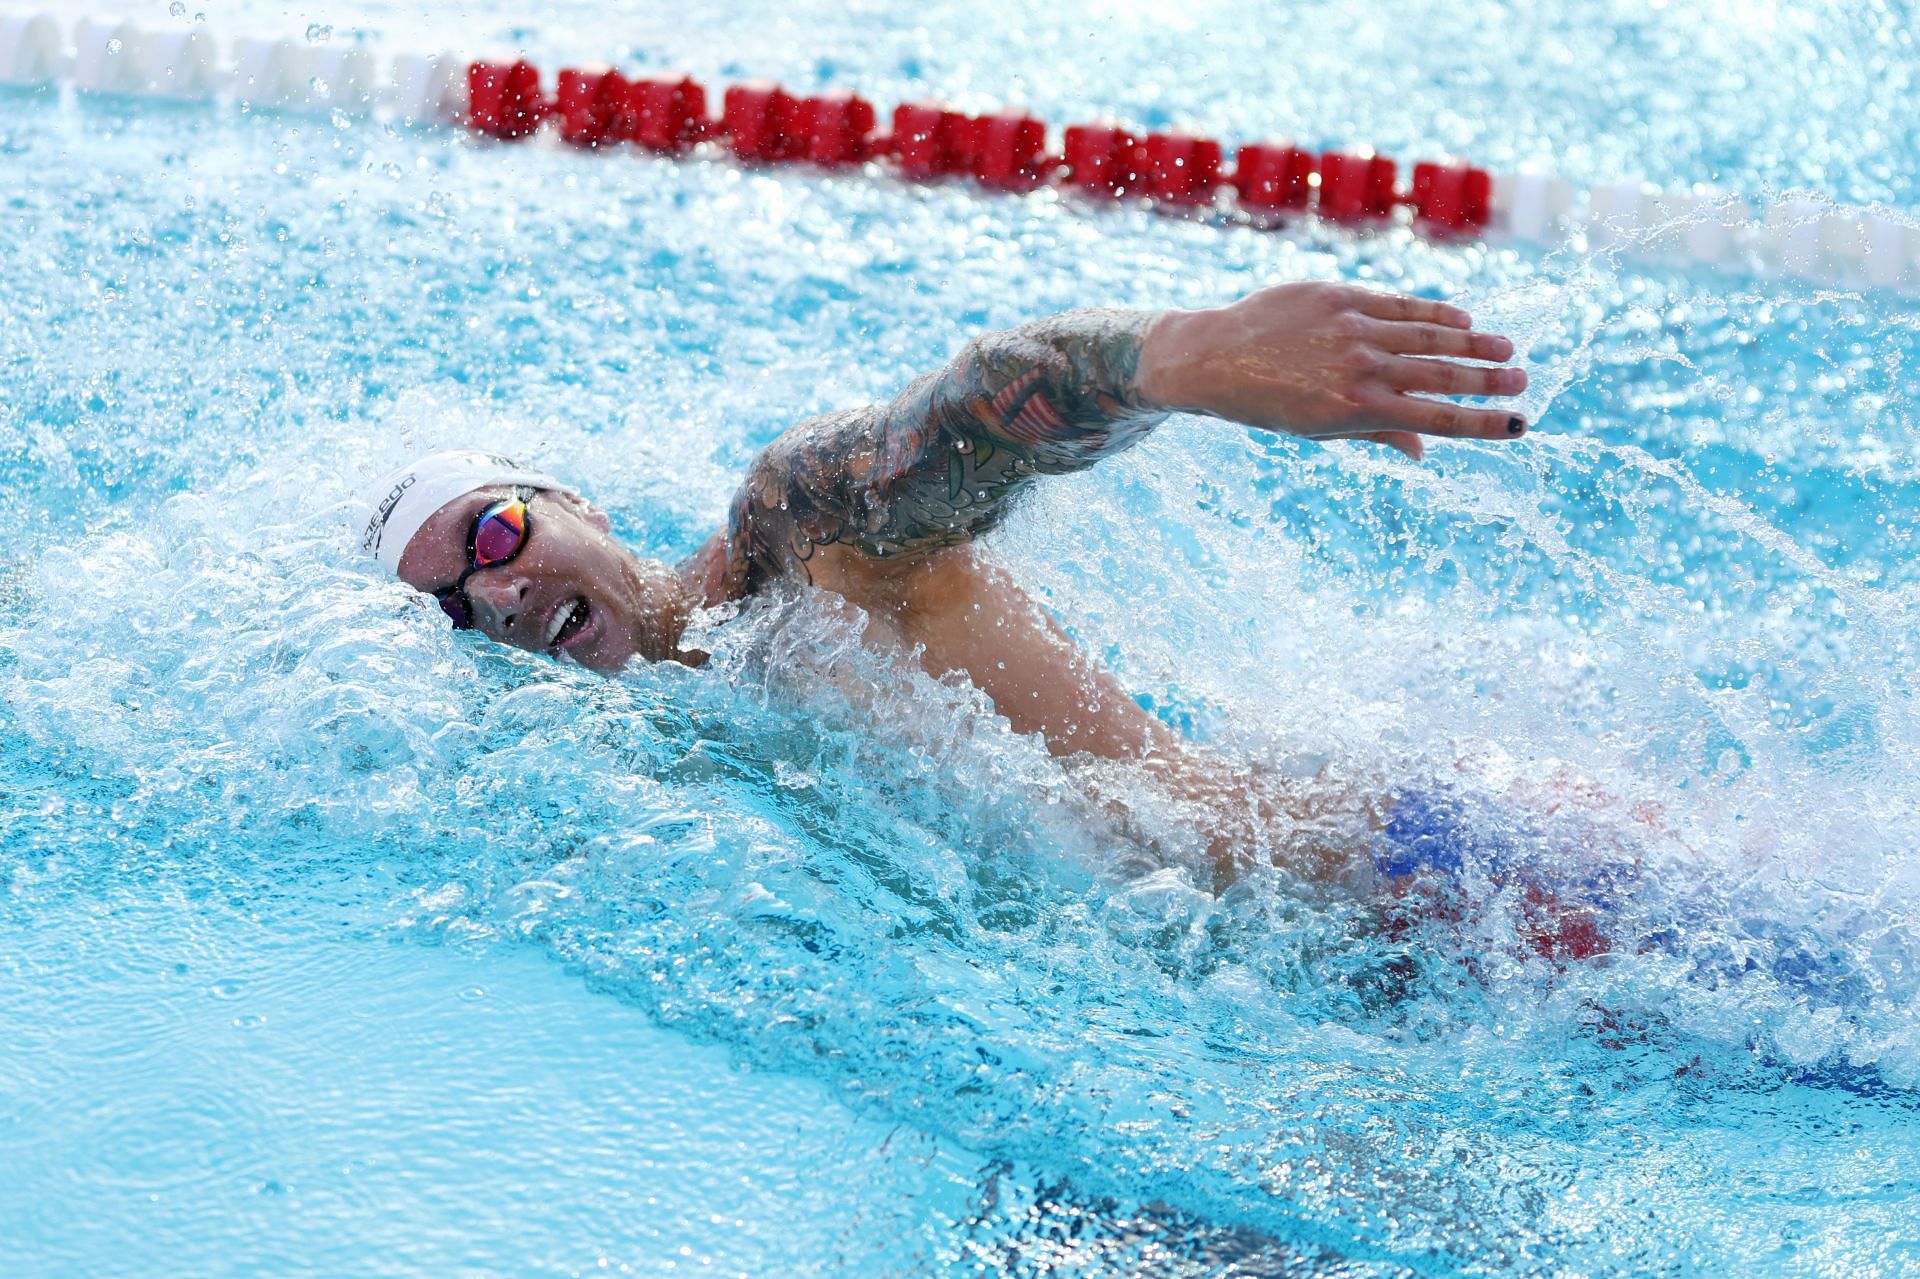 Dressel at the TYR Pro Swim Series, 2022 (Photo by Maddie Meyer/Getty Images)